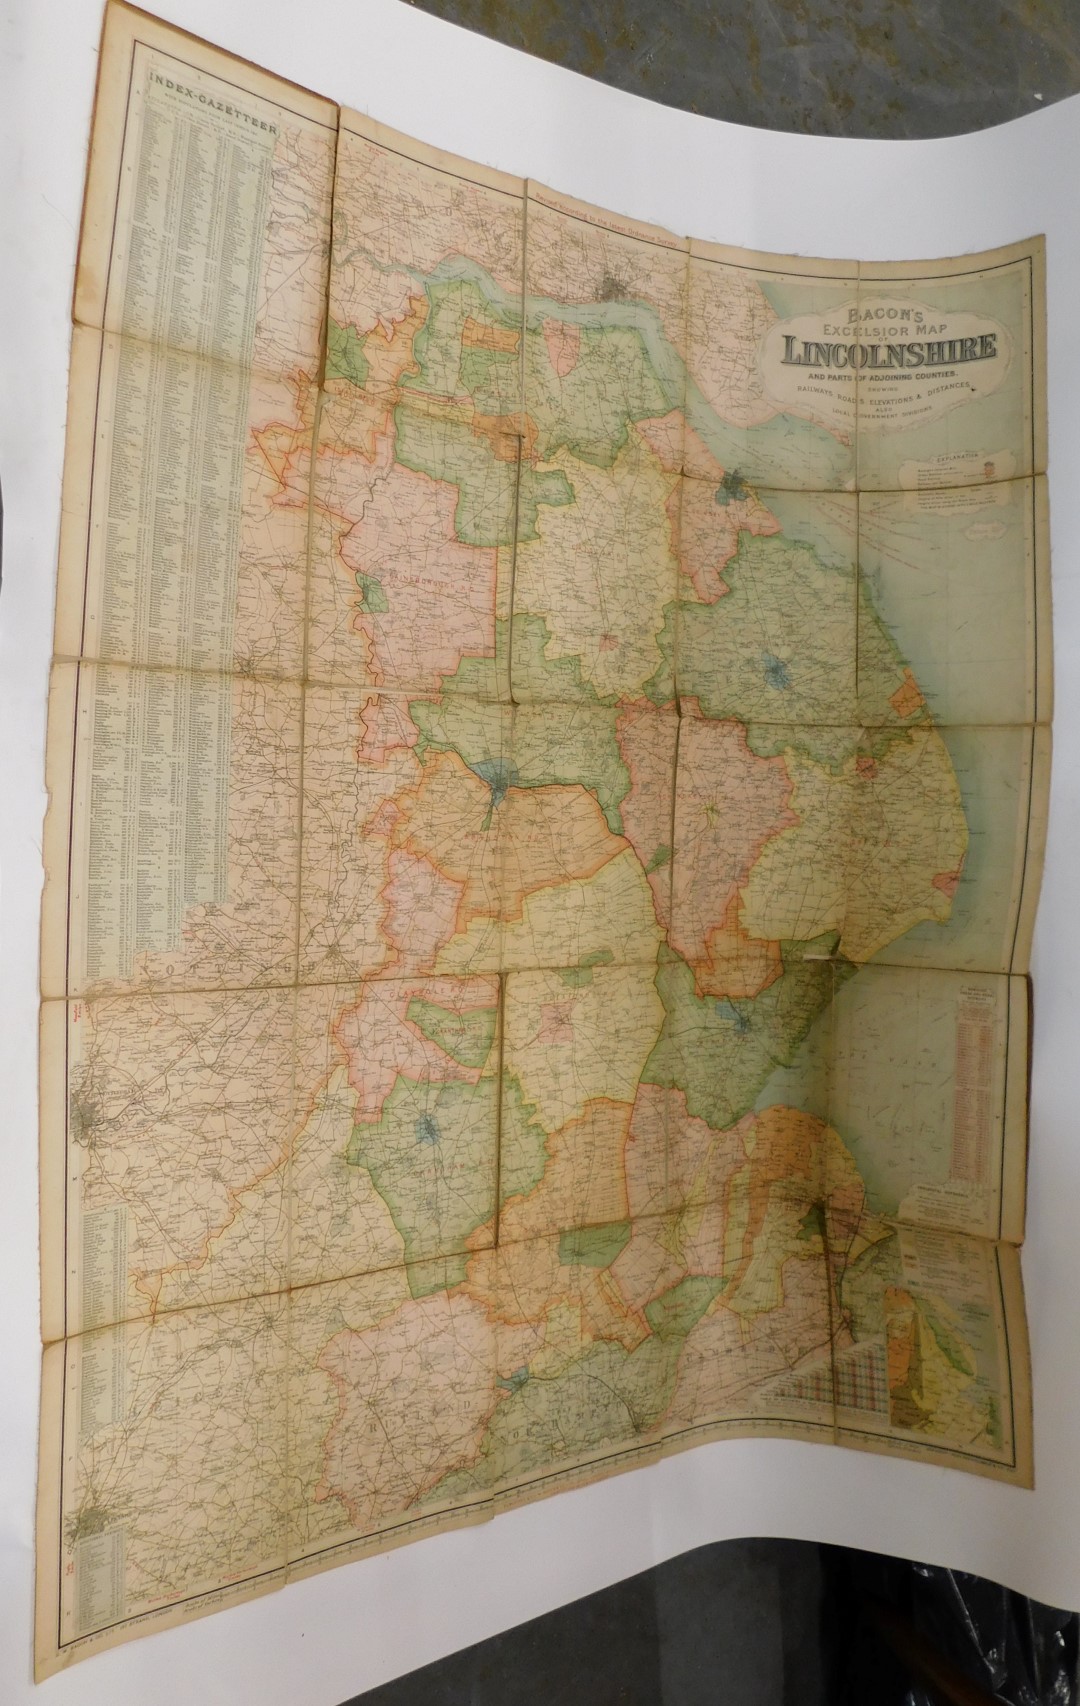 Bacon's Excelsior Map of Lincolnshire, and Parts of Adjoining Counties, with index gazetteer showing - Image 3 of 3